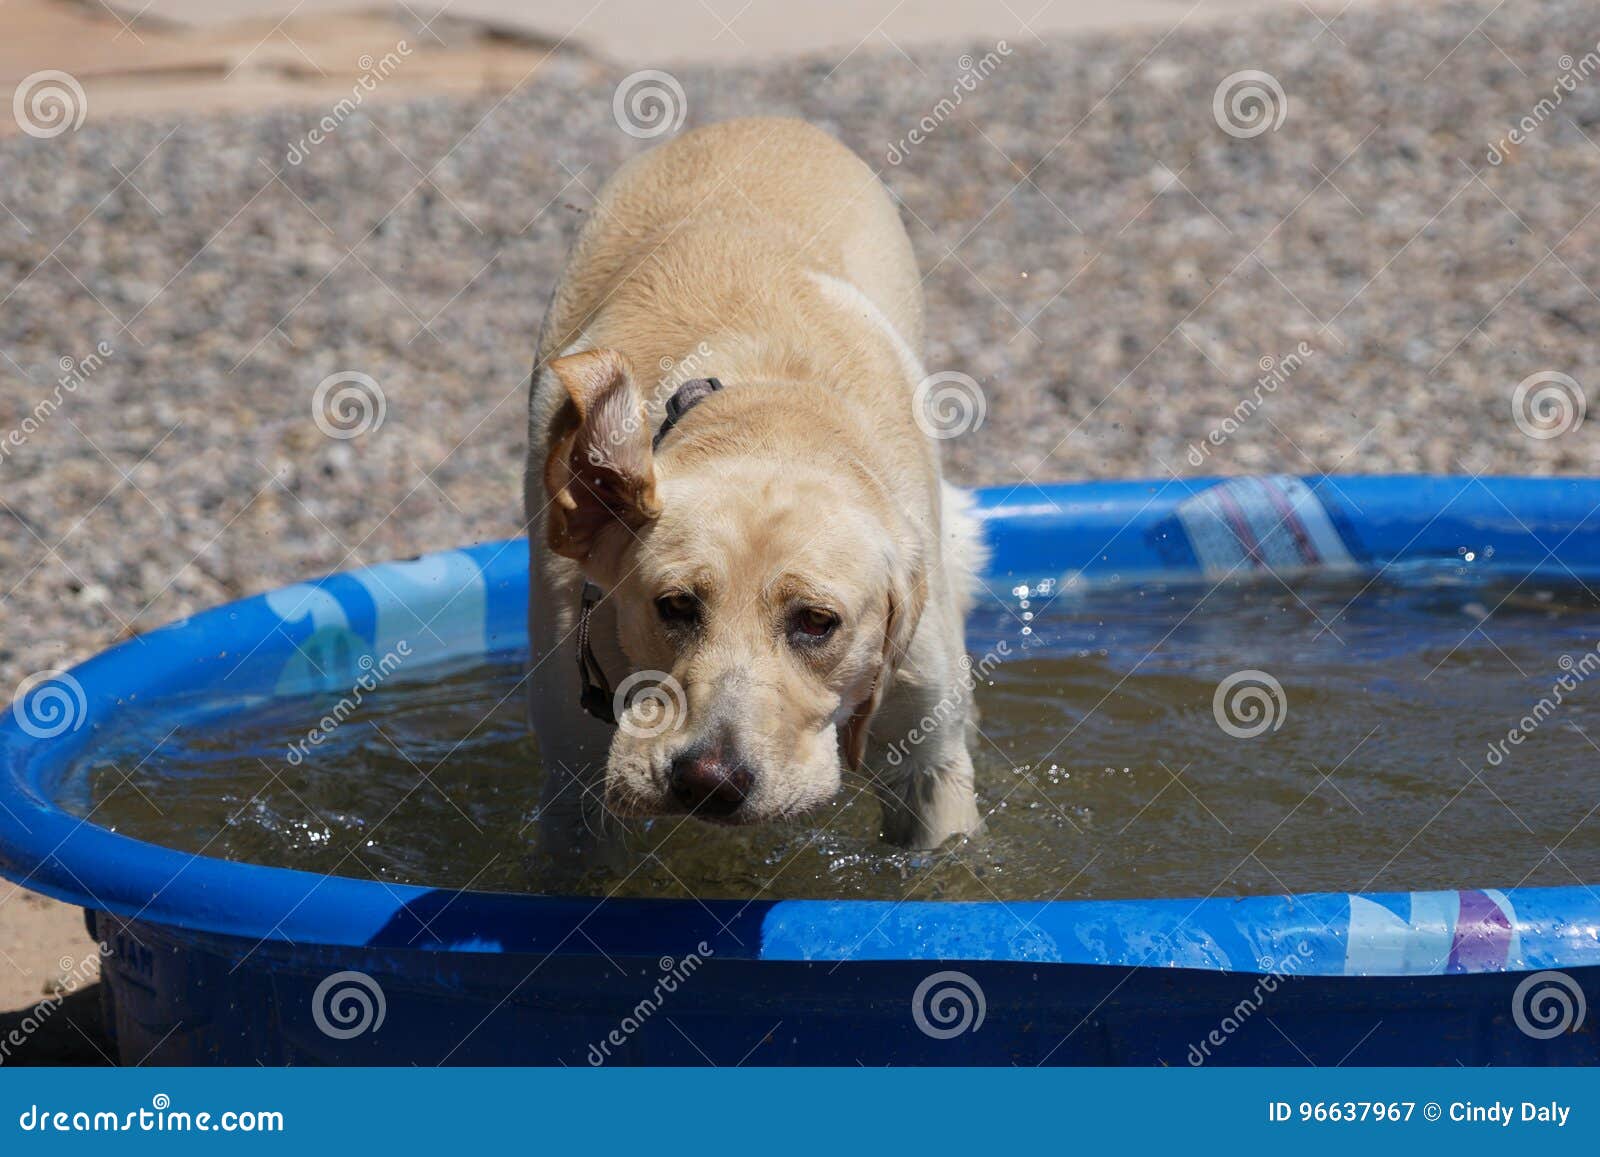 A Labrador Slow Motion Picture Of Her Shaking Her Wet Head Stock Image